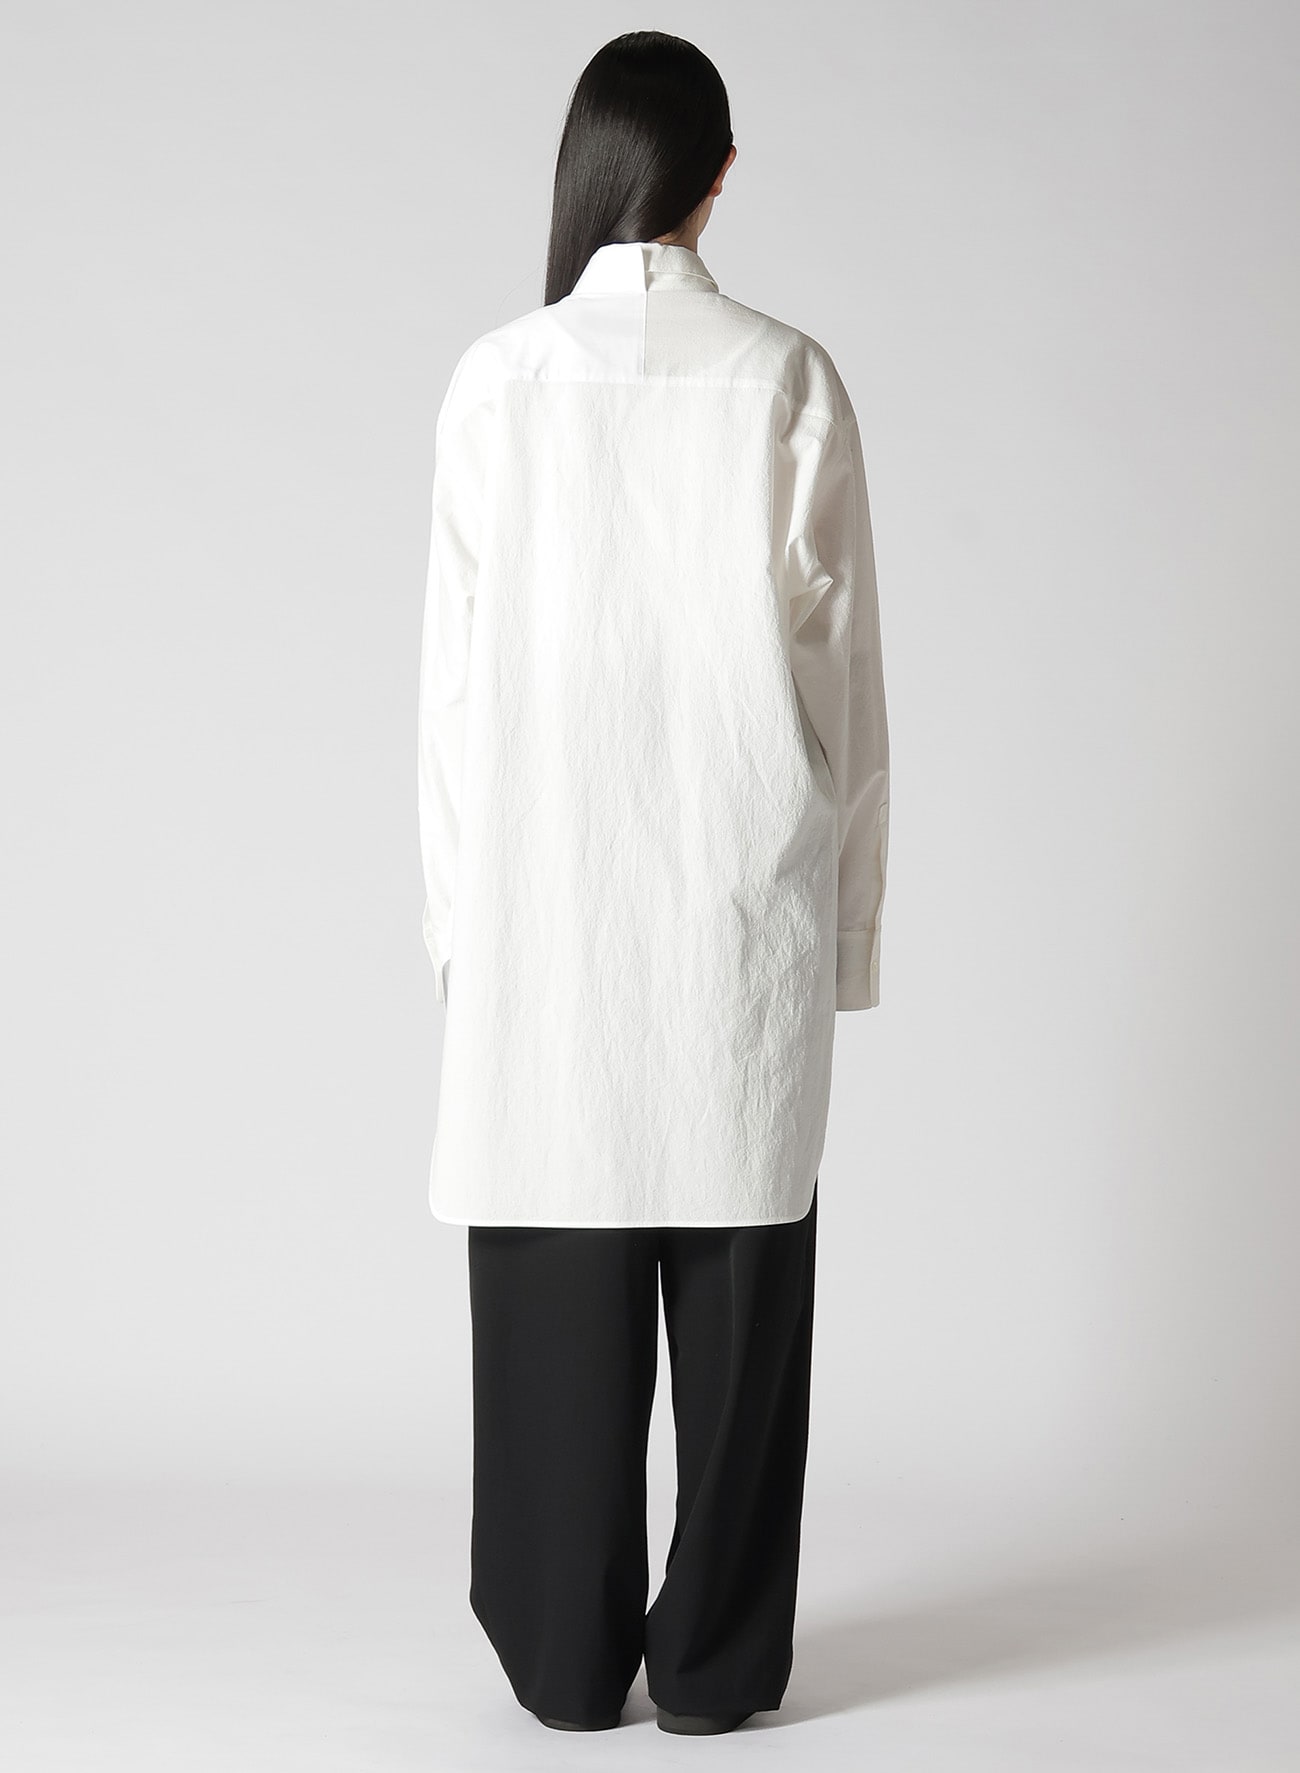 【7/17 12:00(JST) Release】HIGH TWISTED COTTON DOUBLE LAYERED WING COLLAR SHIRT